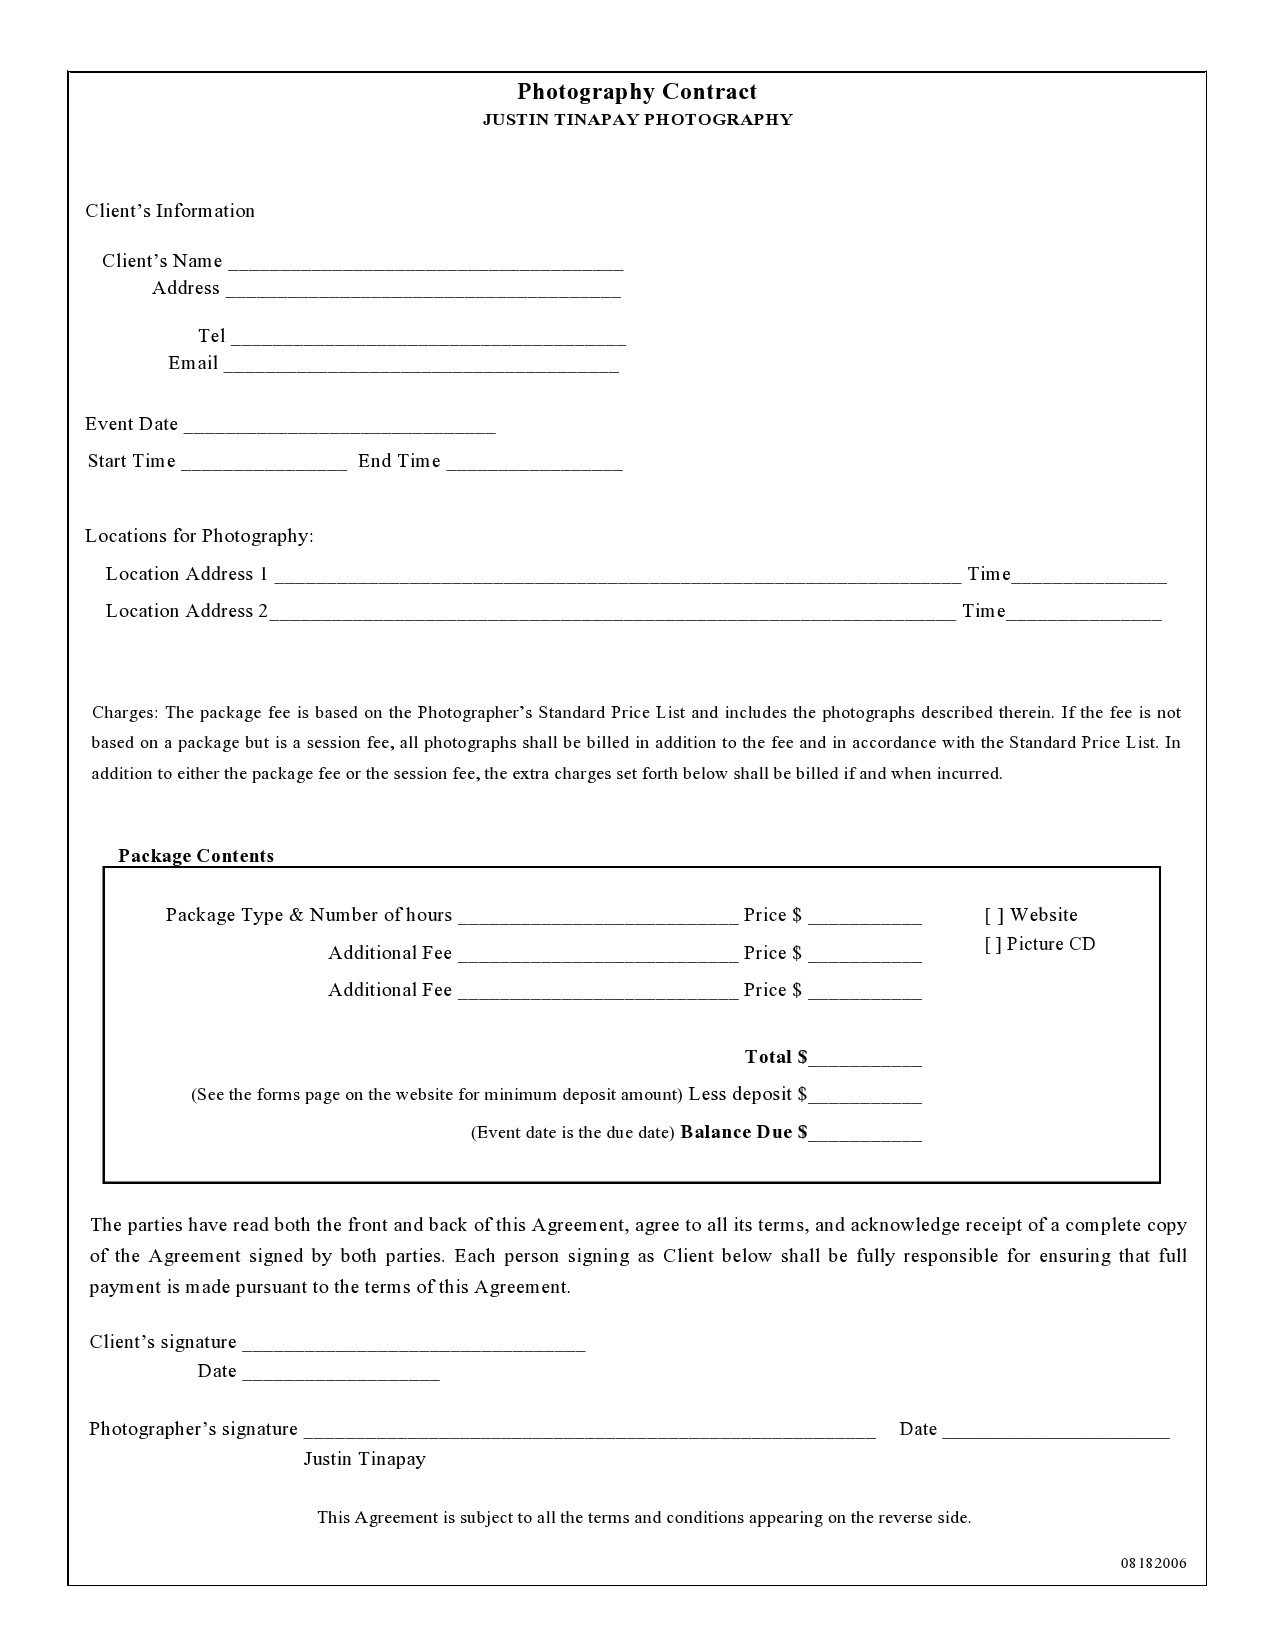 Free photography contract template 03